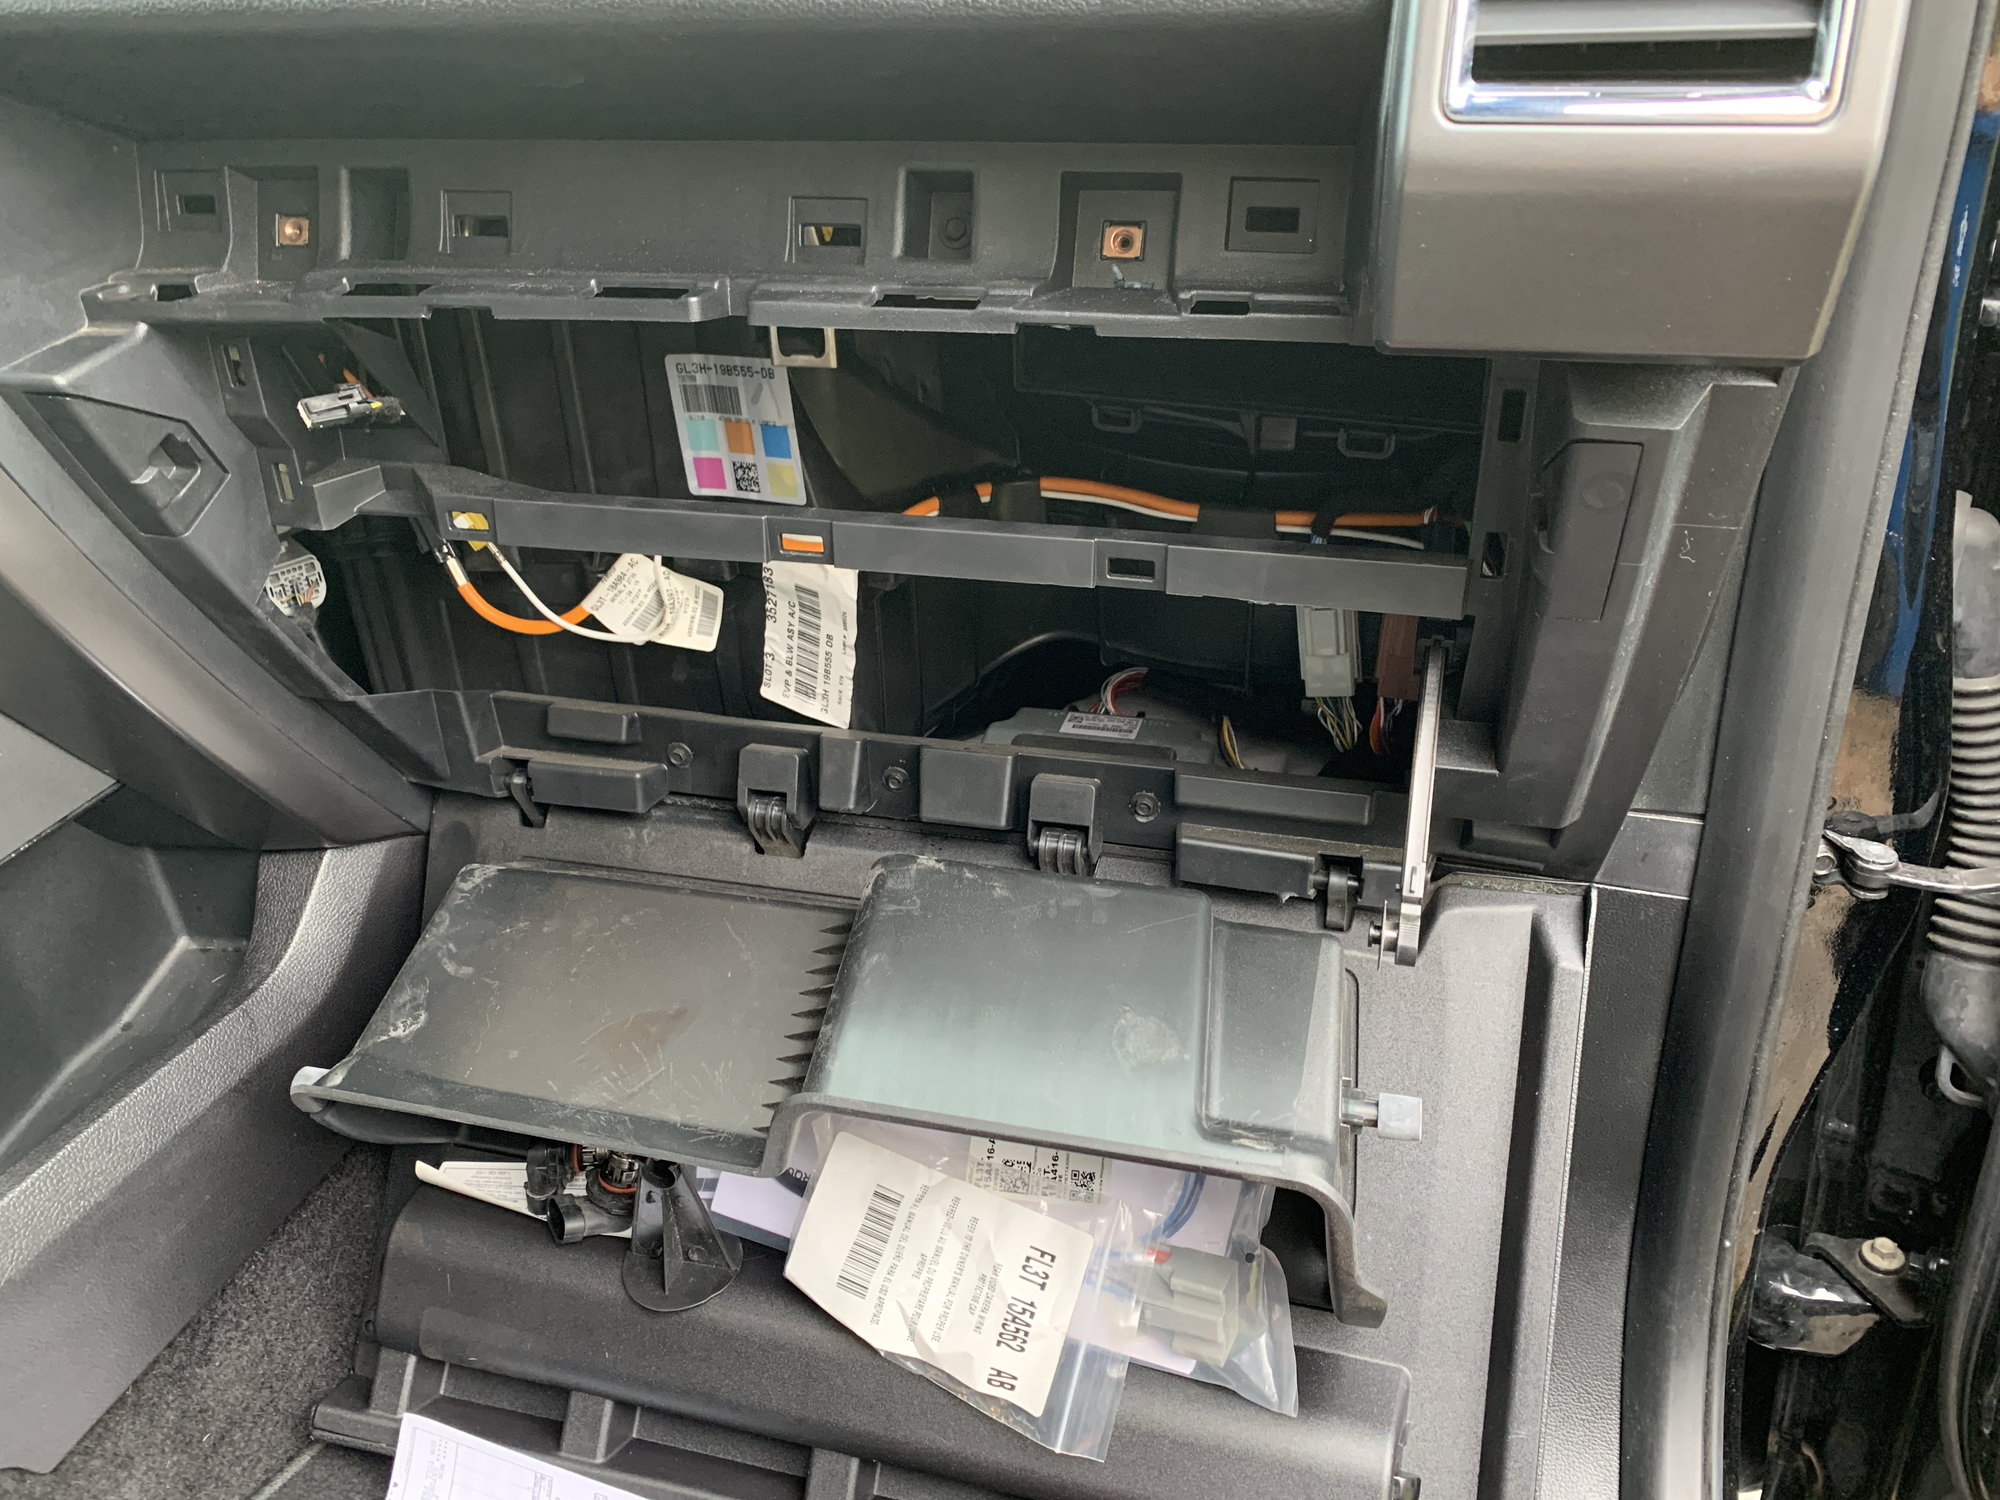 Don't forget about your cabin air filter! - Page 7 - Ford F150 Forum - Community of Ford Truck Fans 2006 Ford Expedition Cabin Air Filter Location